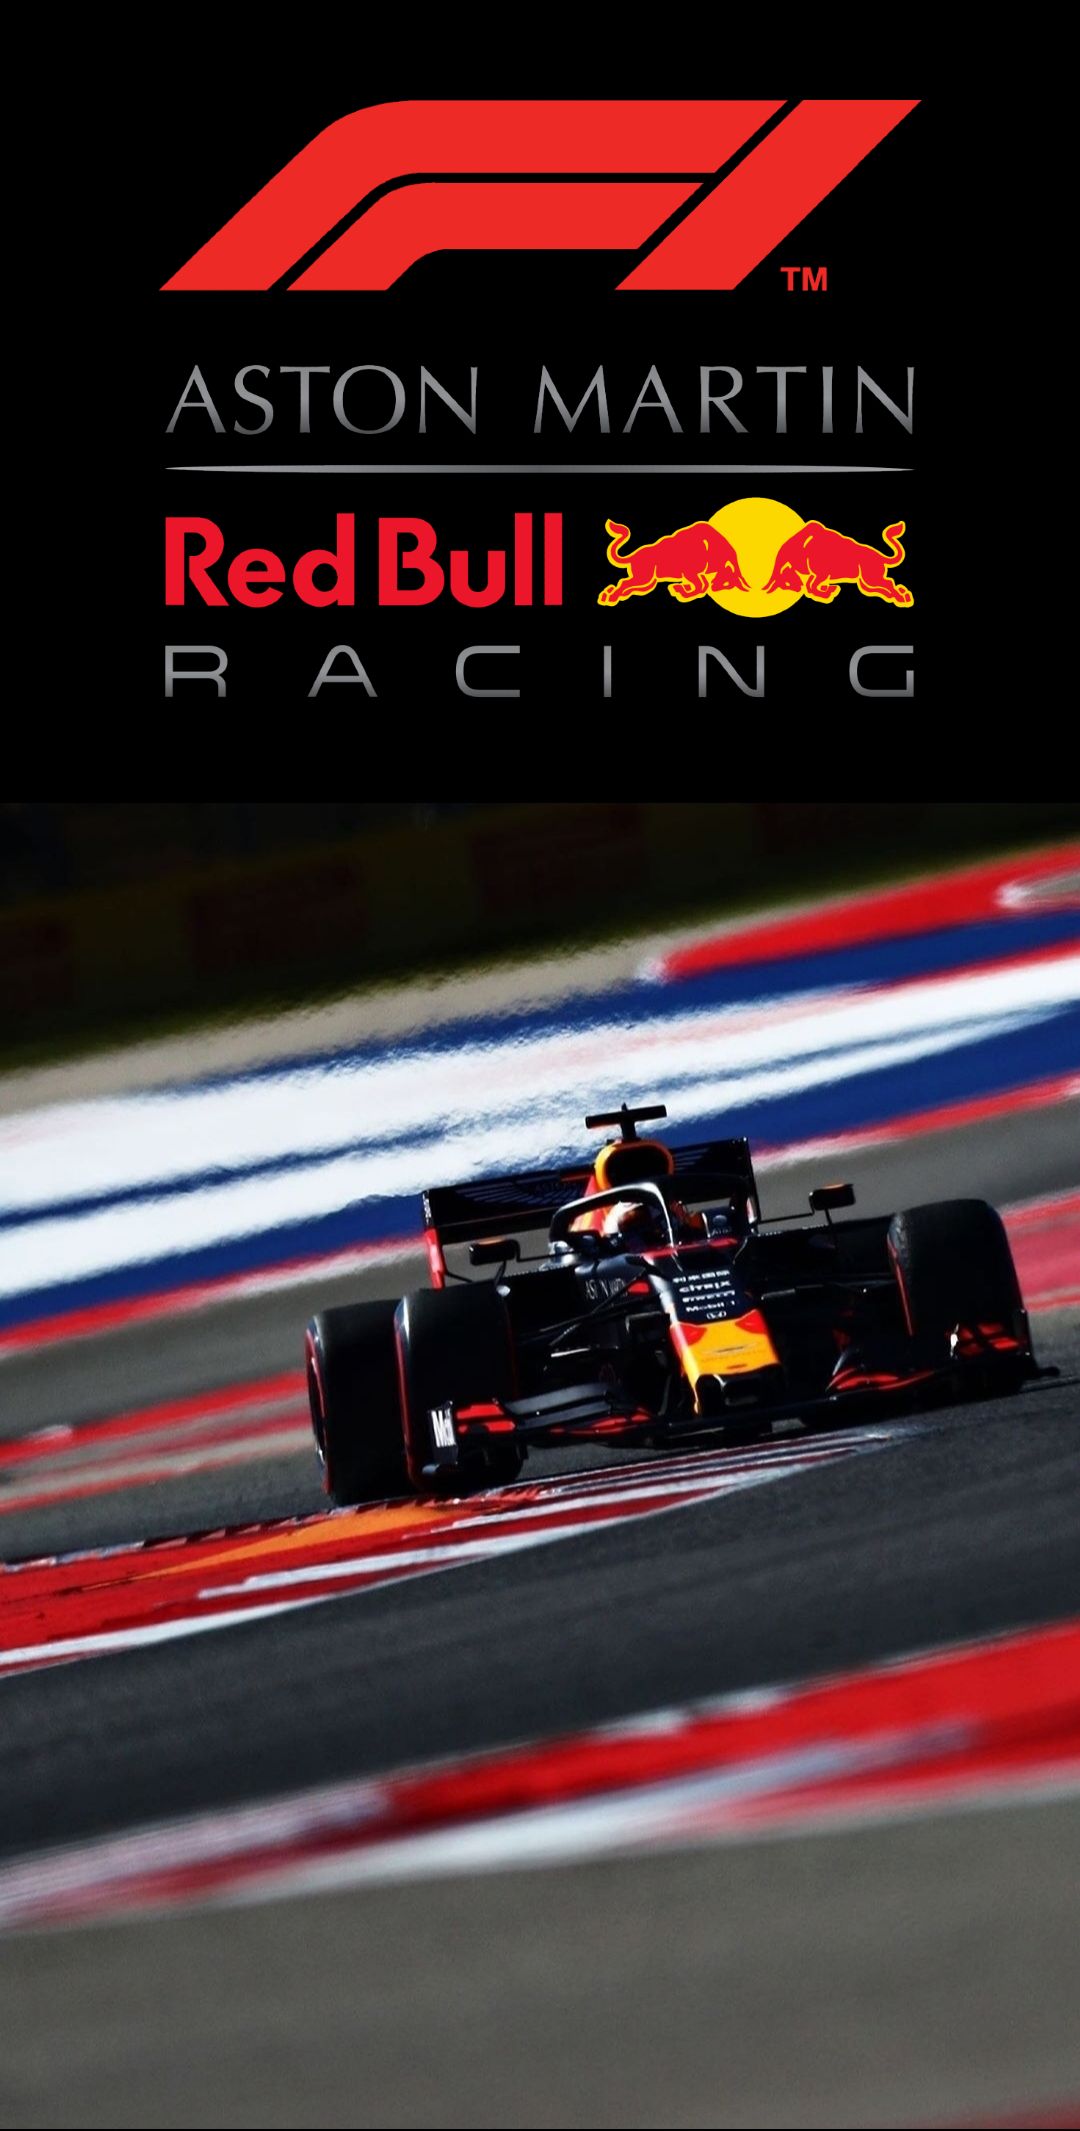 I made this phone wallpaper of Max Verstappen in Mexico. Hope you